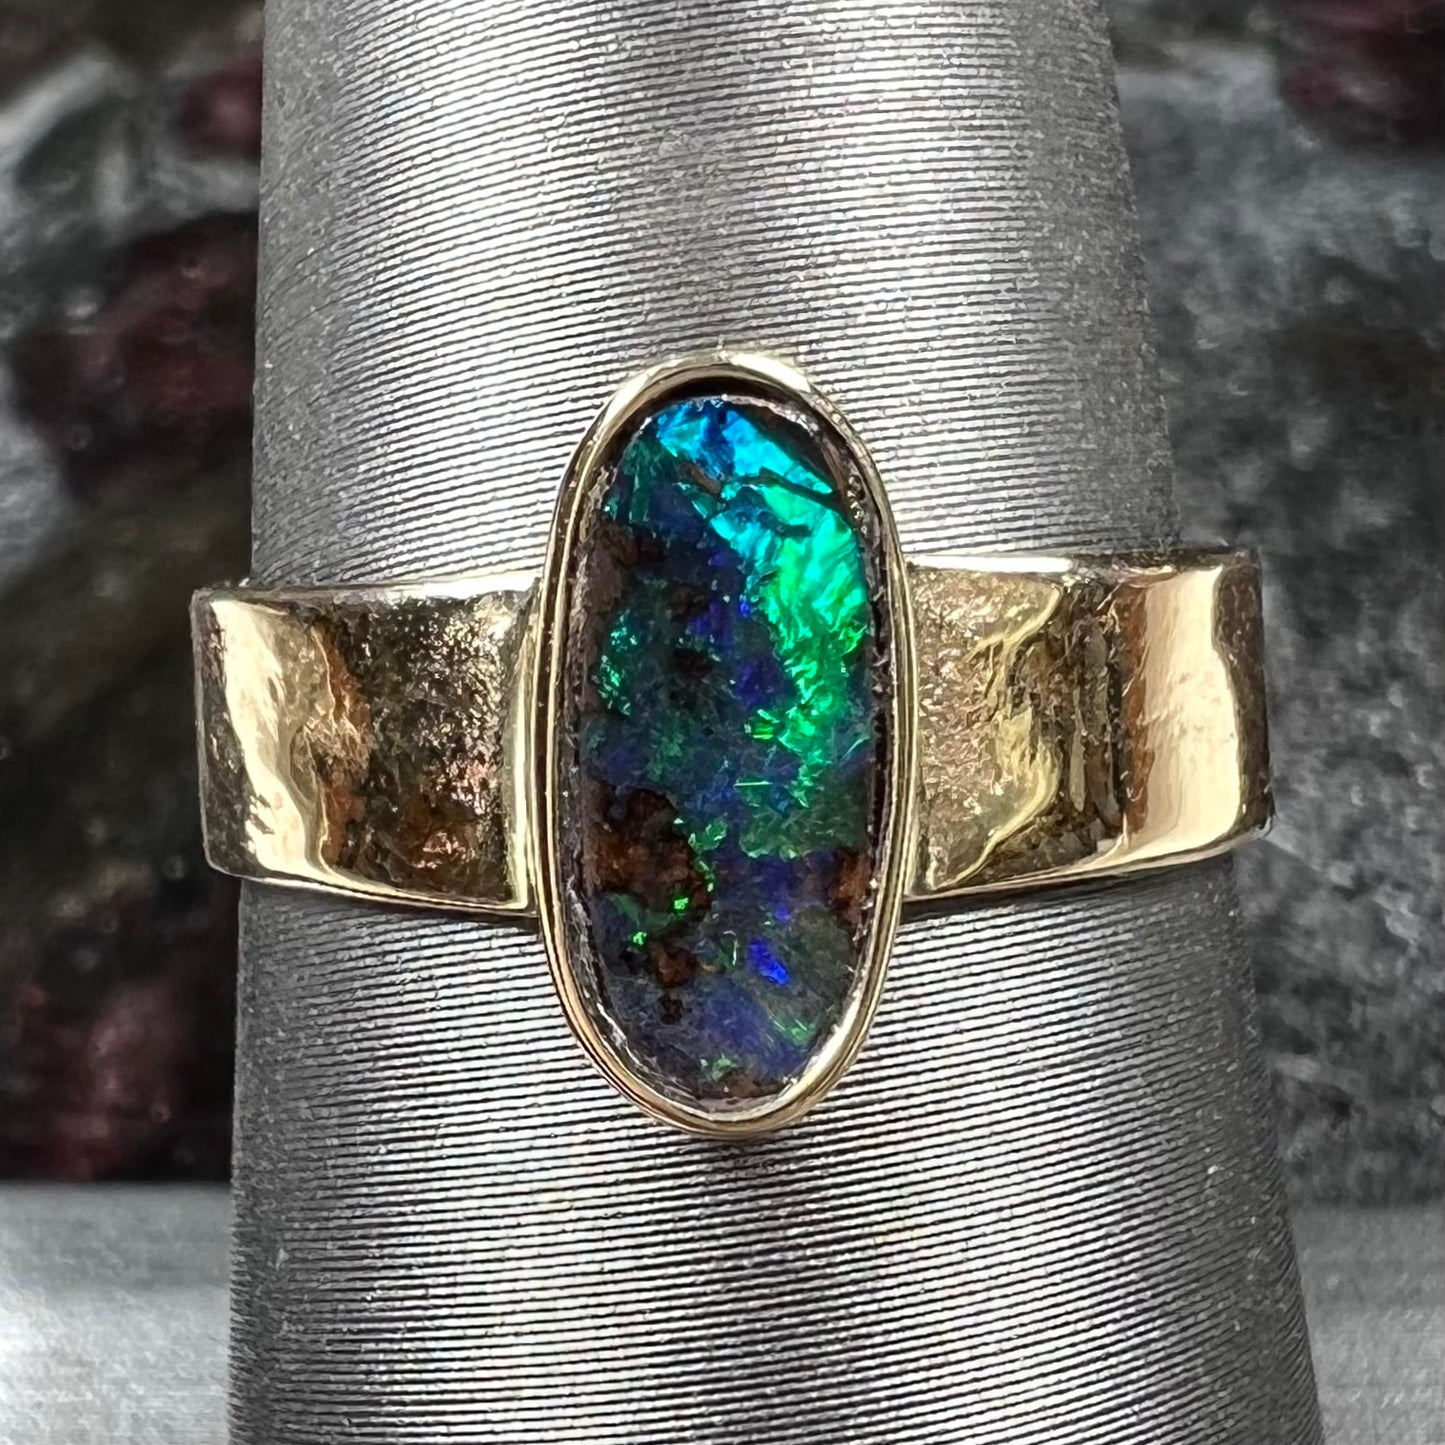 A blue green oval cabochon cut Australian boulder opal set in a yellow gold solitaire ring.